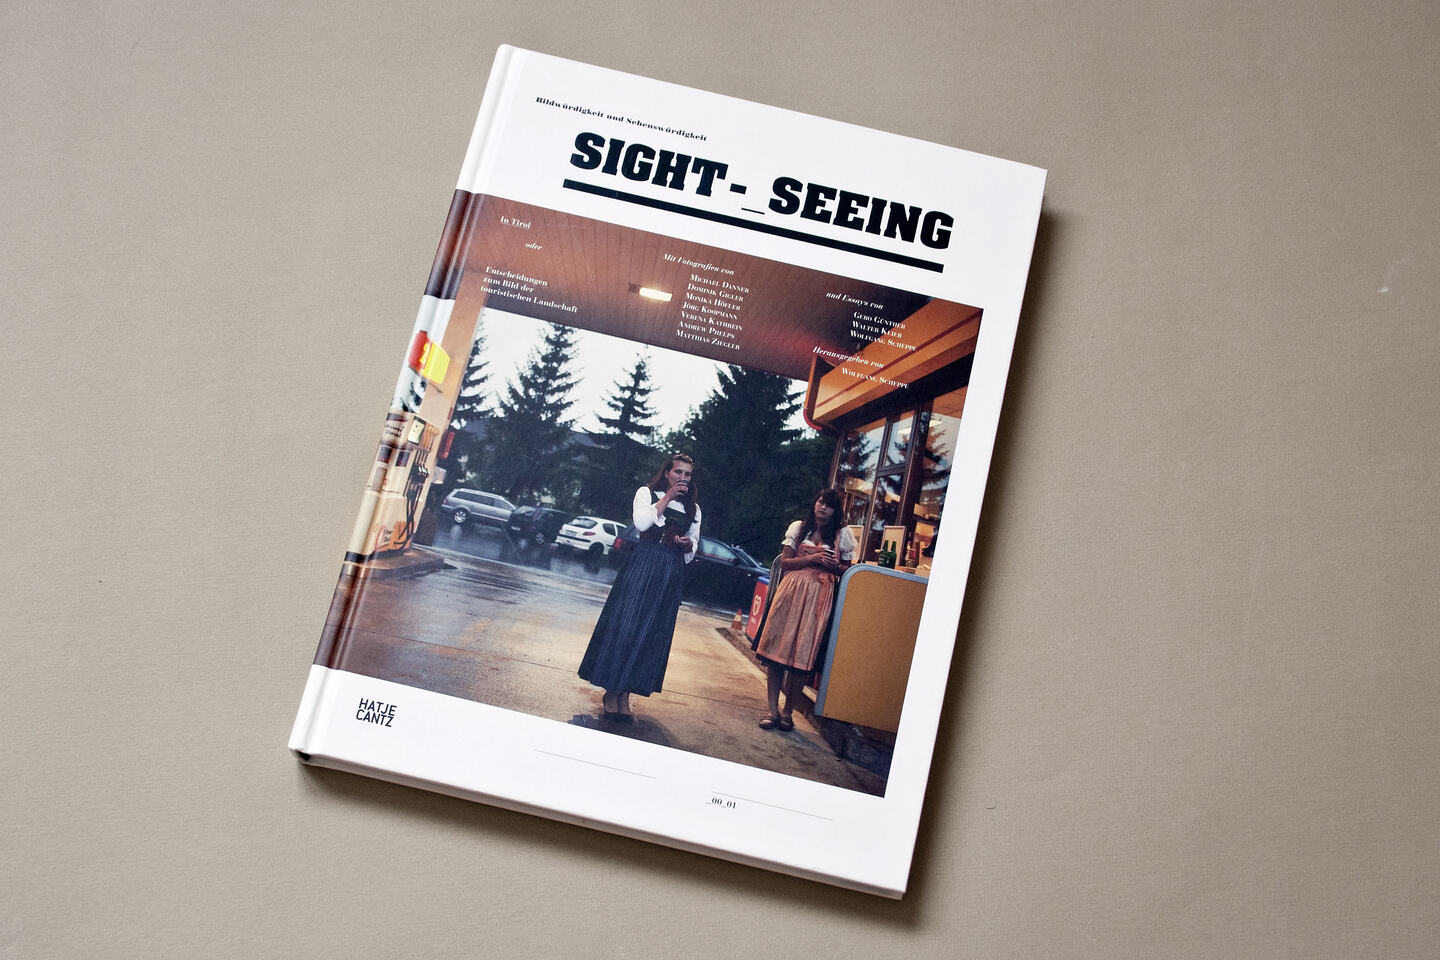 
      The cover of the book Sight-_Seeing.
      